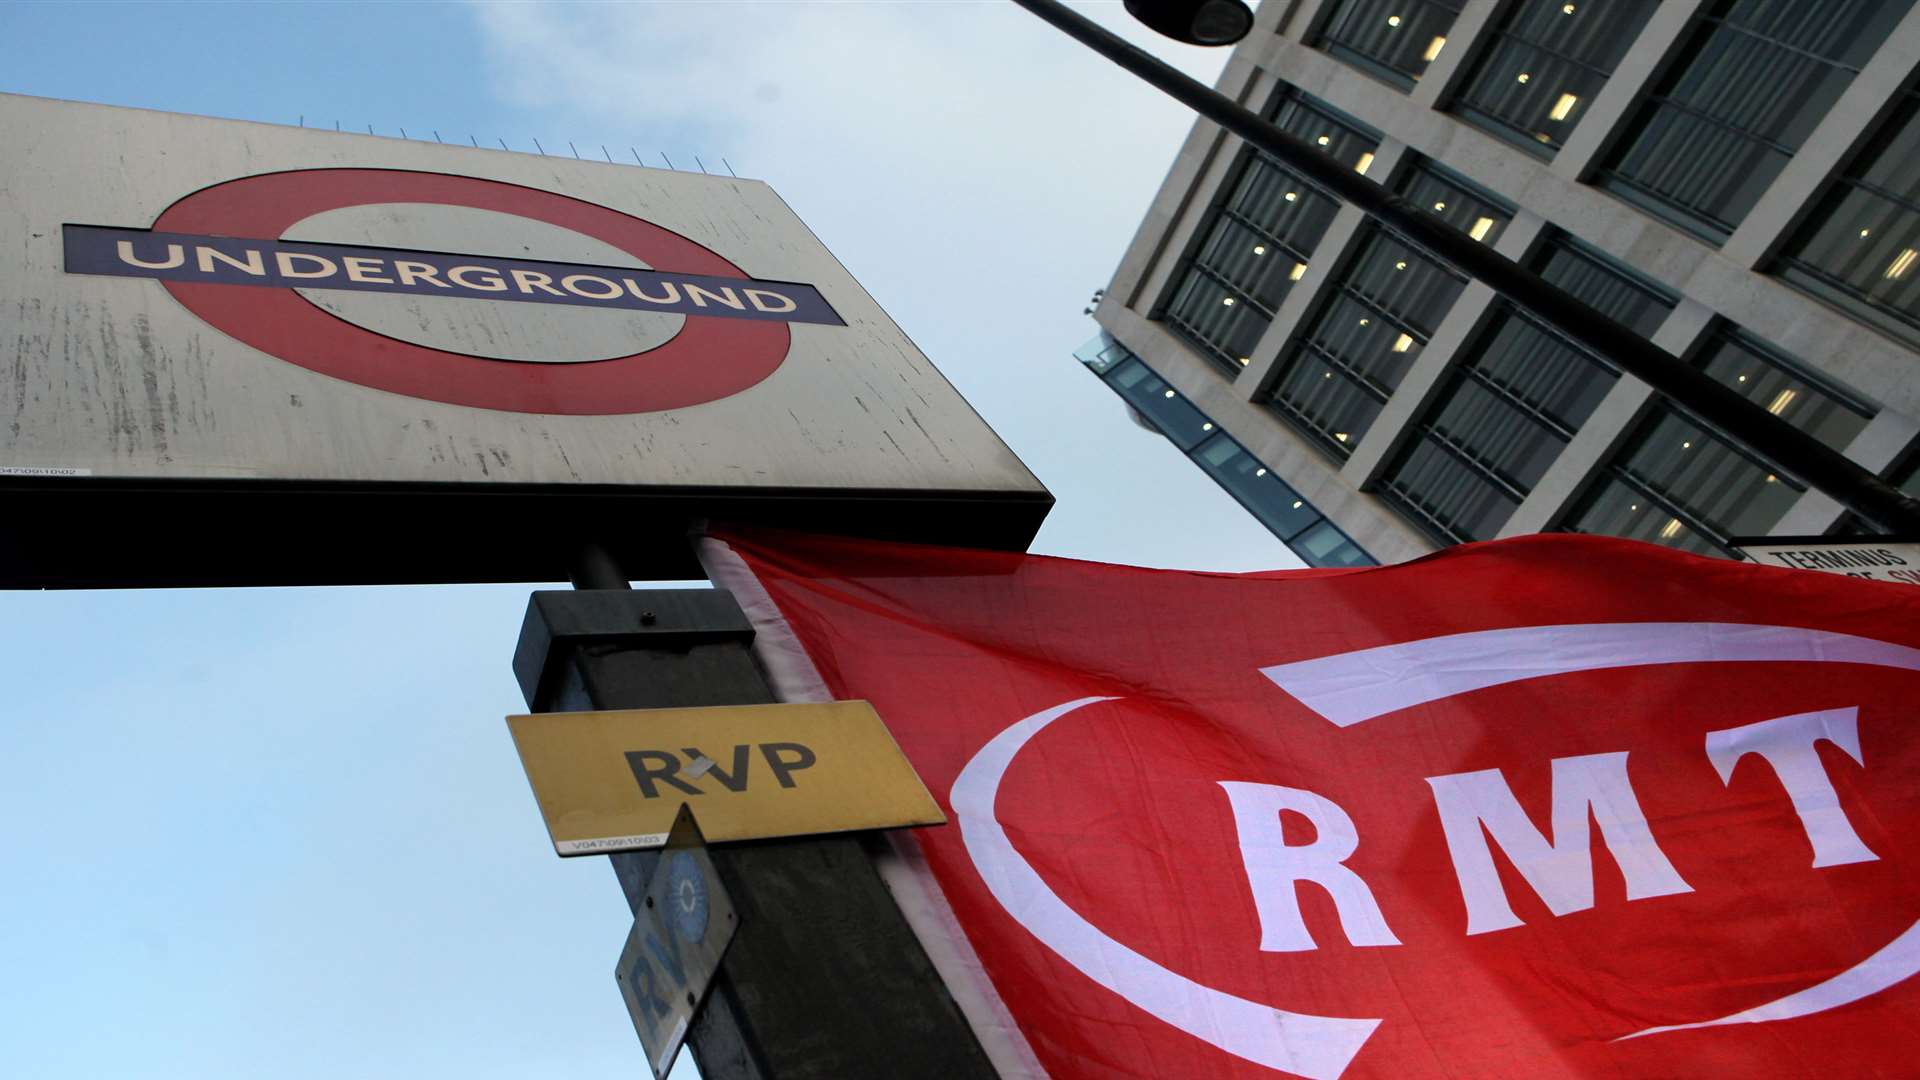 The RMT Union is holding a London Underground strike. Picture: Oli Scarff/Getty Images